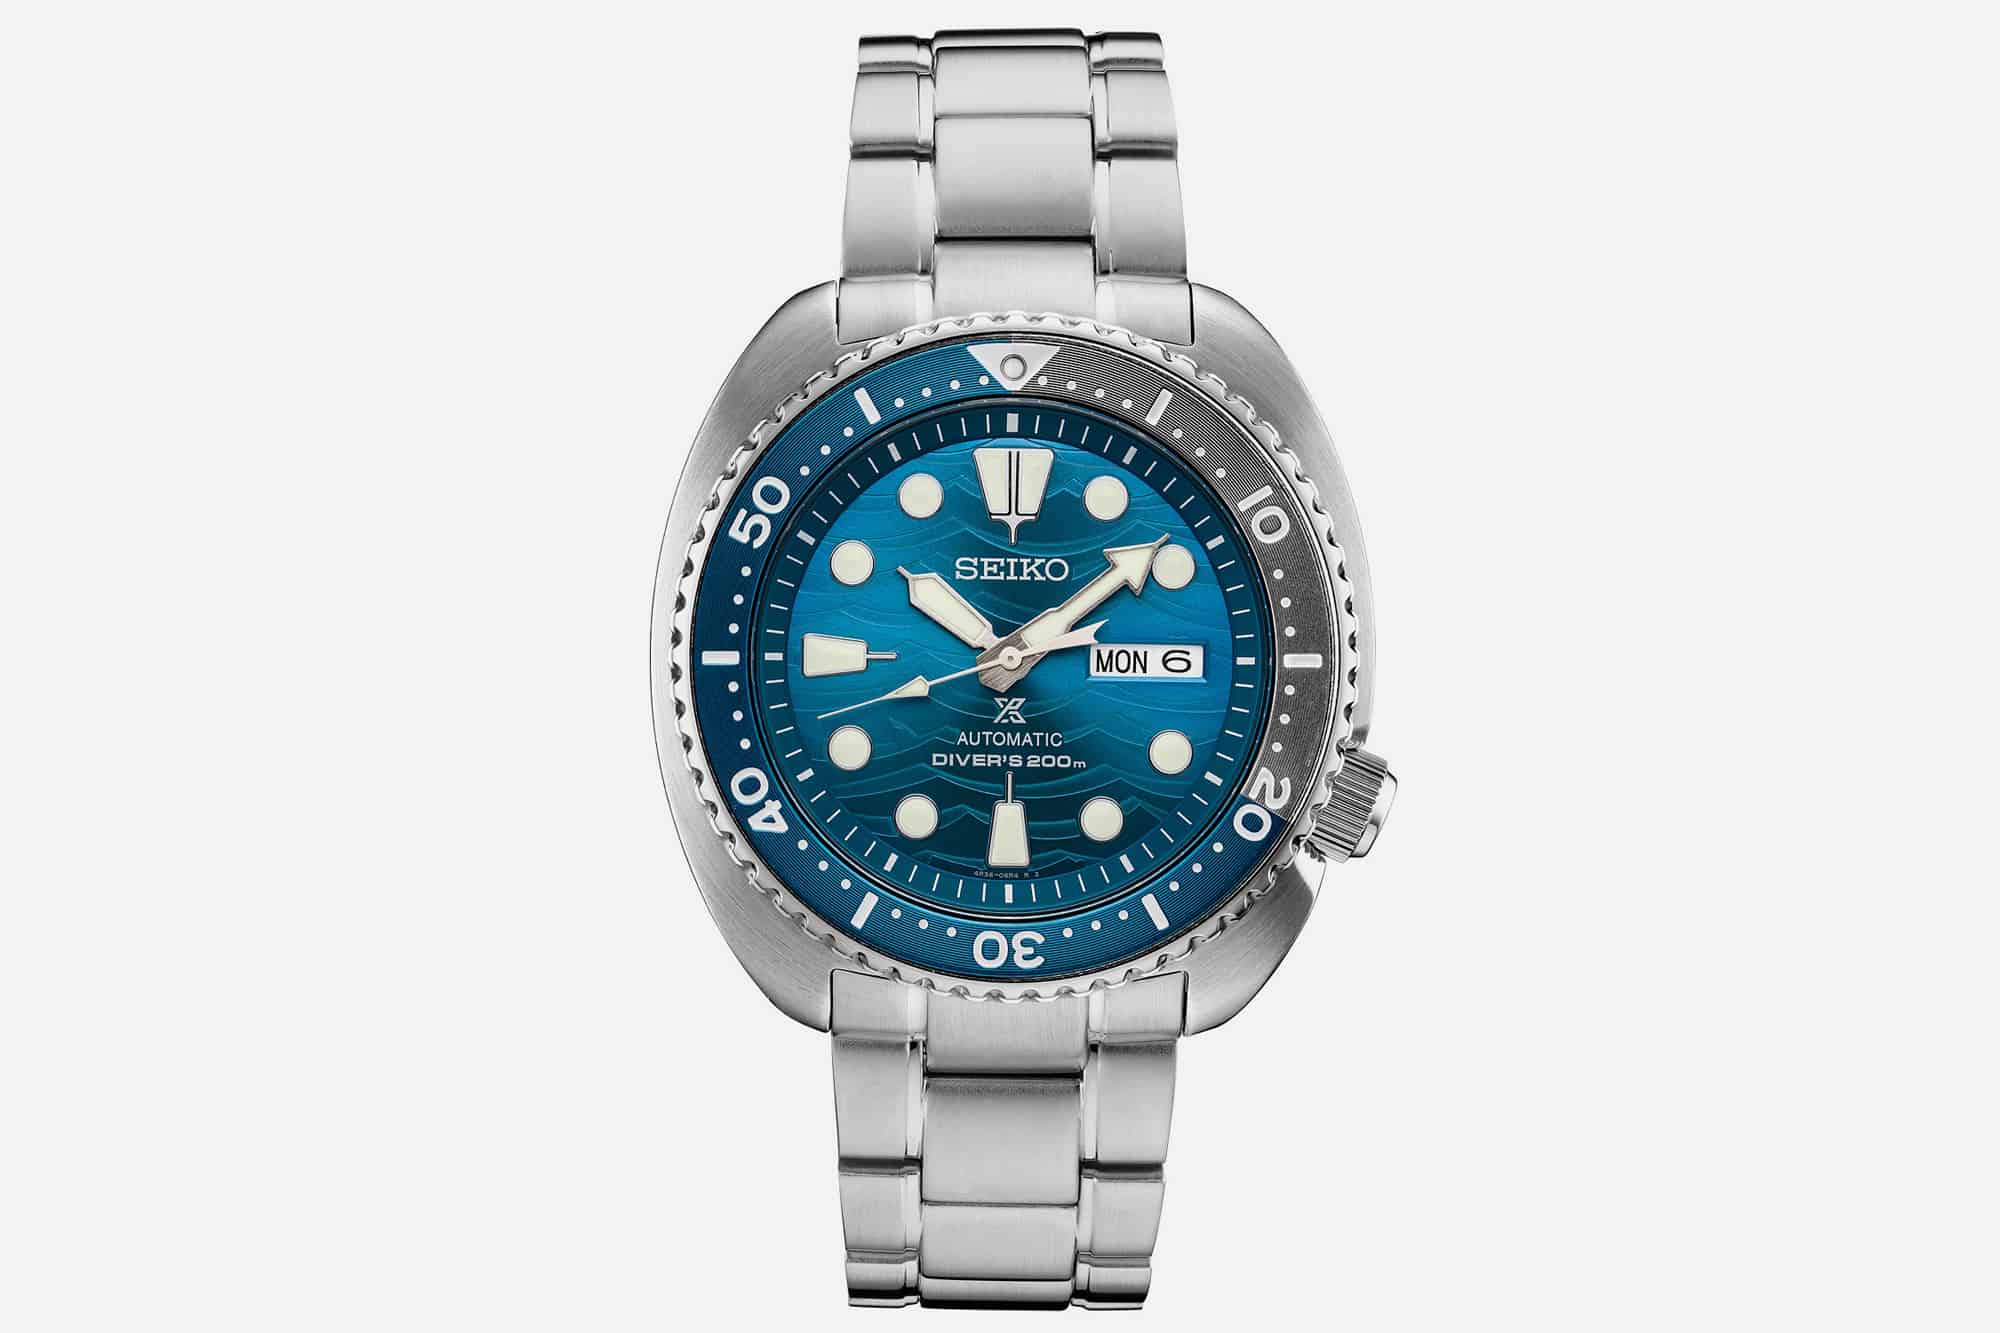 Introducing the Seiko "Save the Ocean" Turtle Ref. SRPD21 and Ref. SRPD23 - Worn & Wound